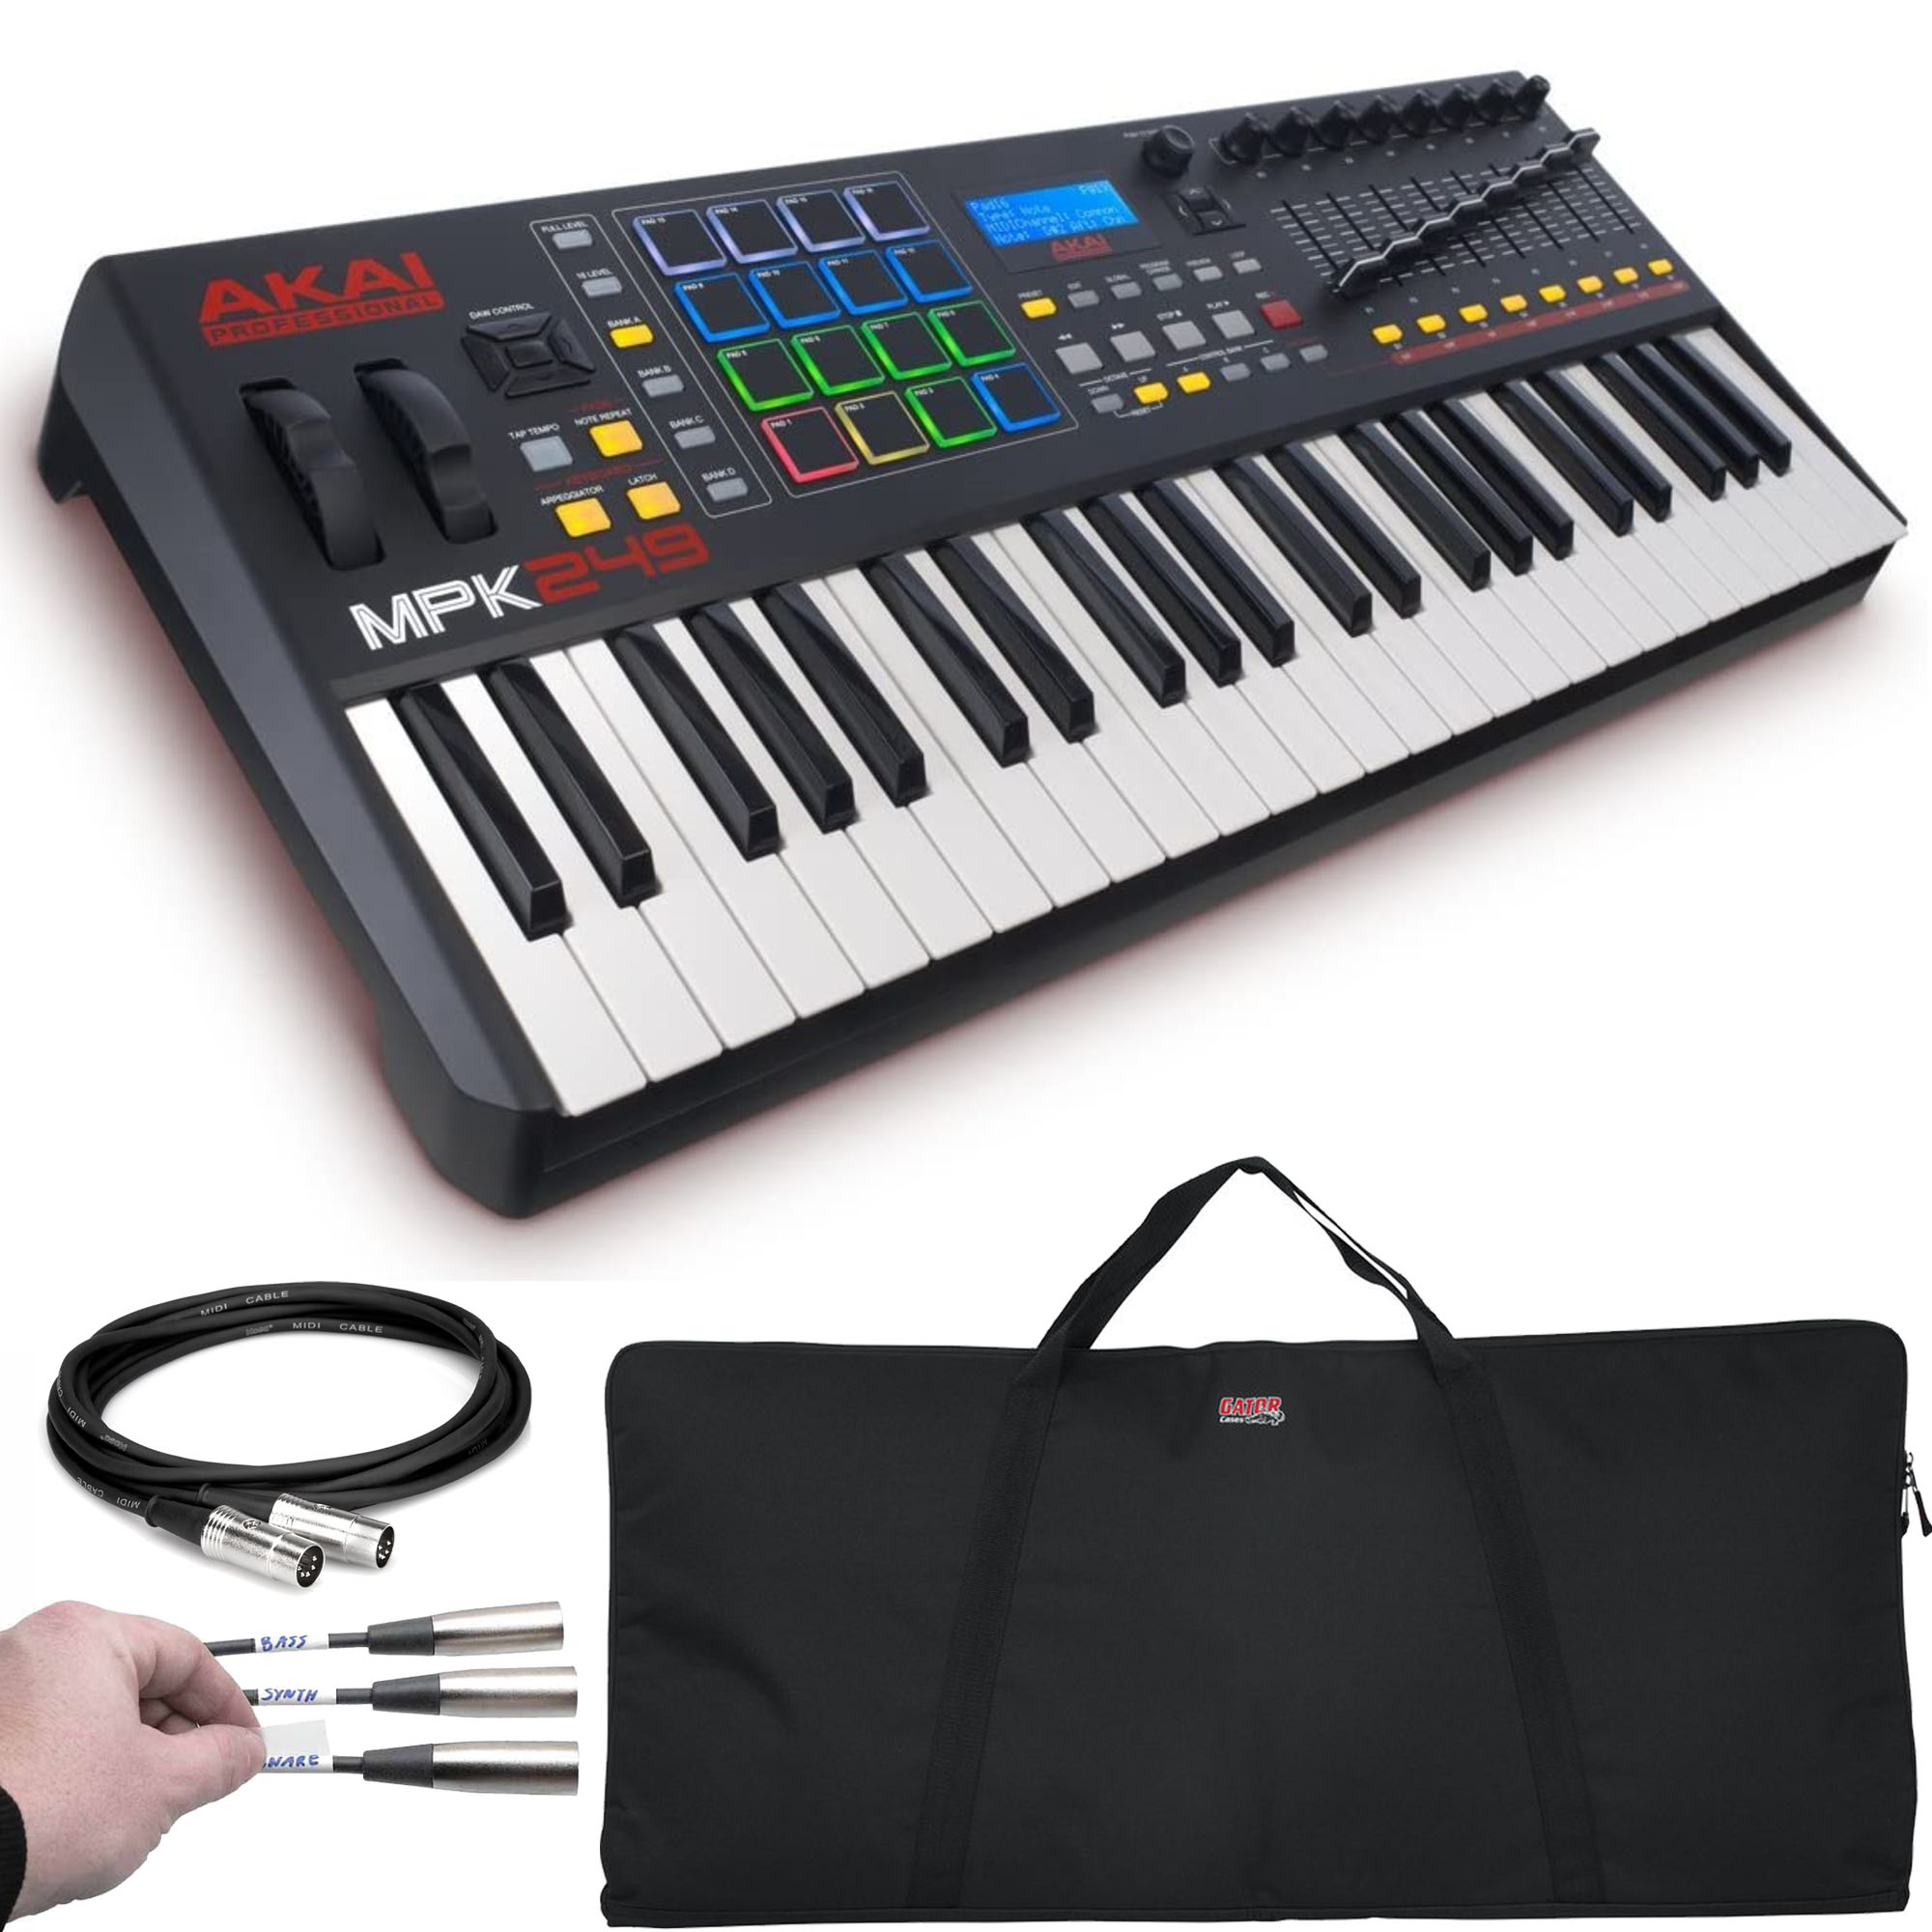 refrigerator Irreplaceable unique Photo4Less | Akai Professional MPK249 | 49-Key USB MIDI Keyboard & Drum Pad  Controller with LCD Screen (16 Pads / 8 Knobs / 8 Faders), VIP Software  Download Included